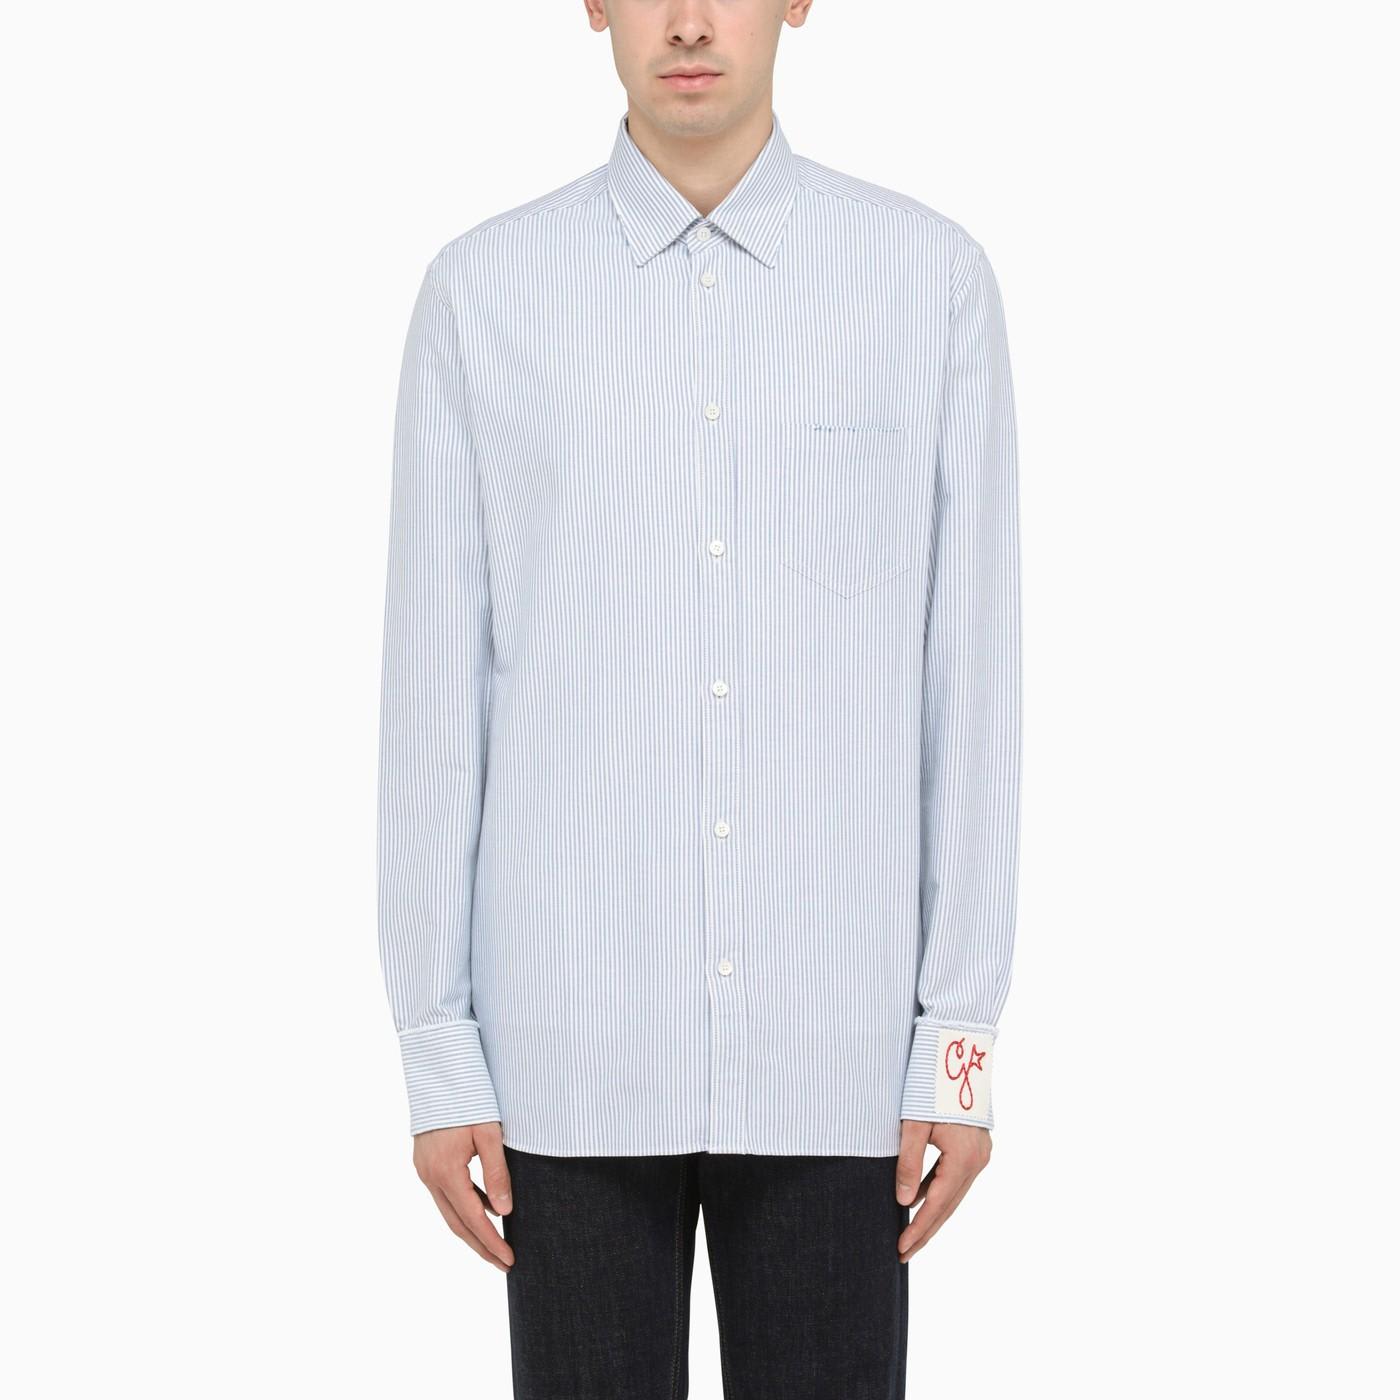 GOLDEN GOOSE WHITE AND BLUE STRIPED SHIRT